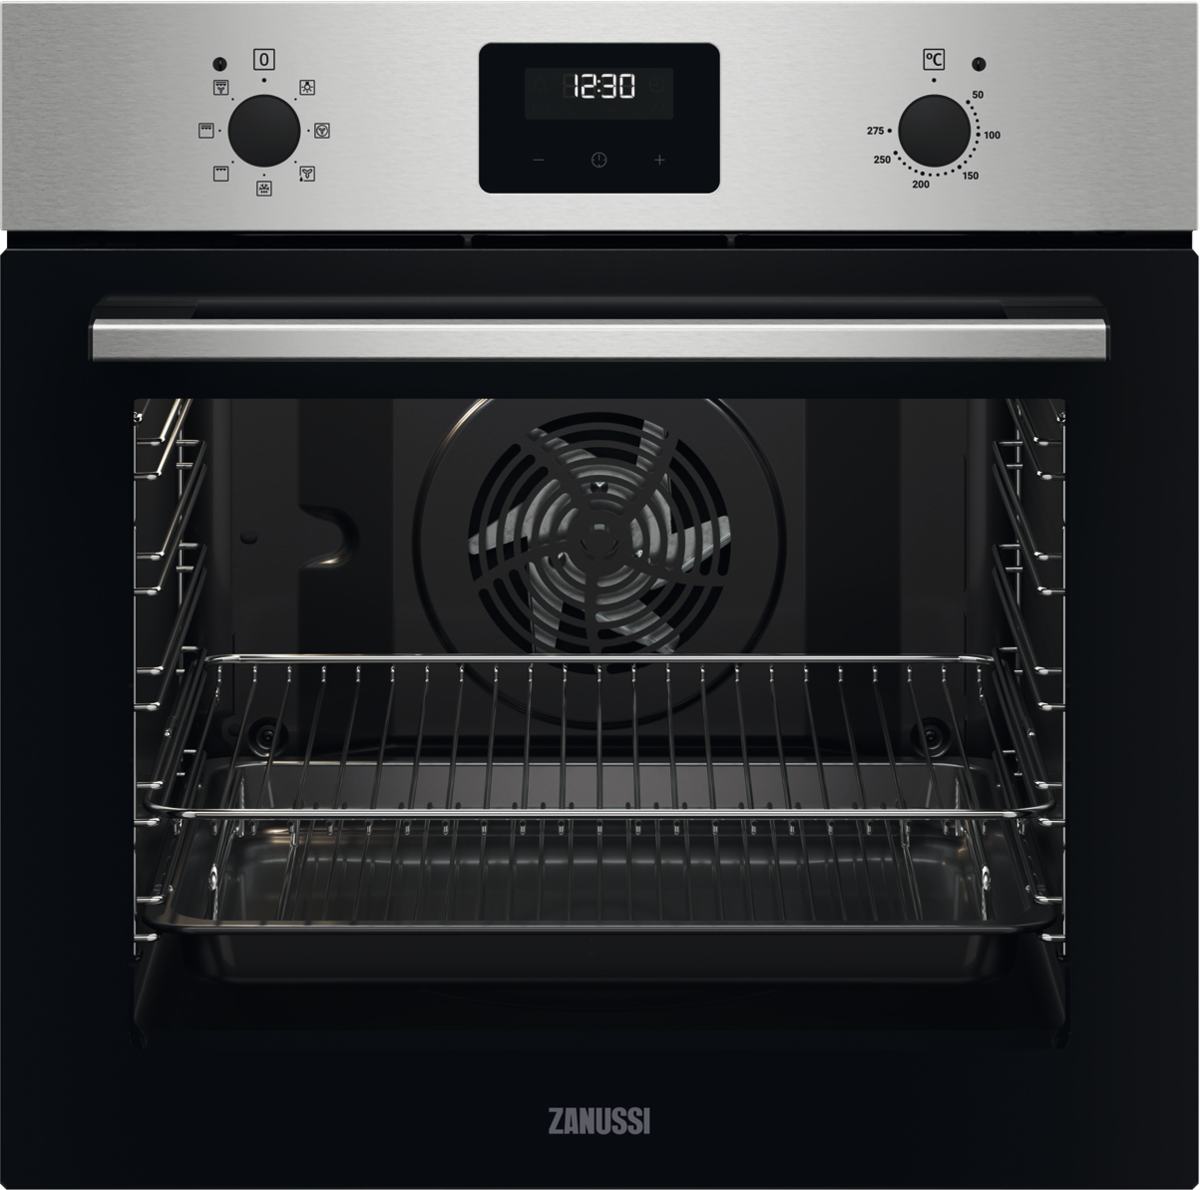 Zanussi ZOHNX3X1 Built In Electric Single Oven - Stainless Steel - A Rated, Stainless Steel